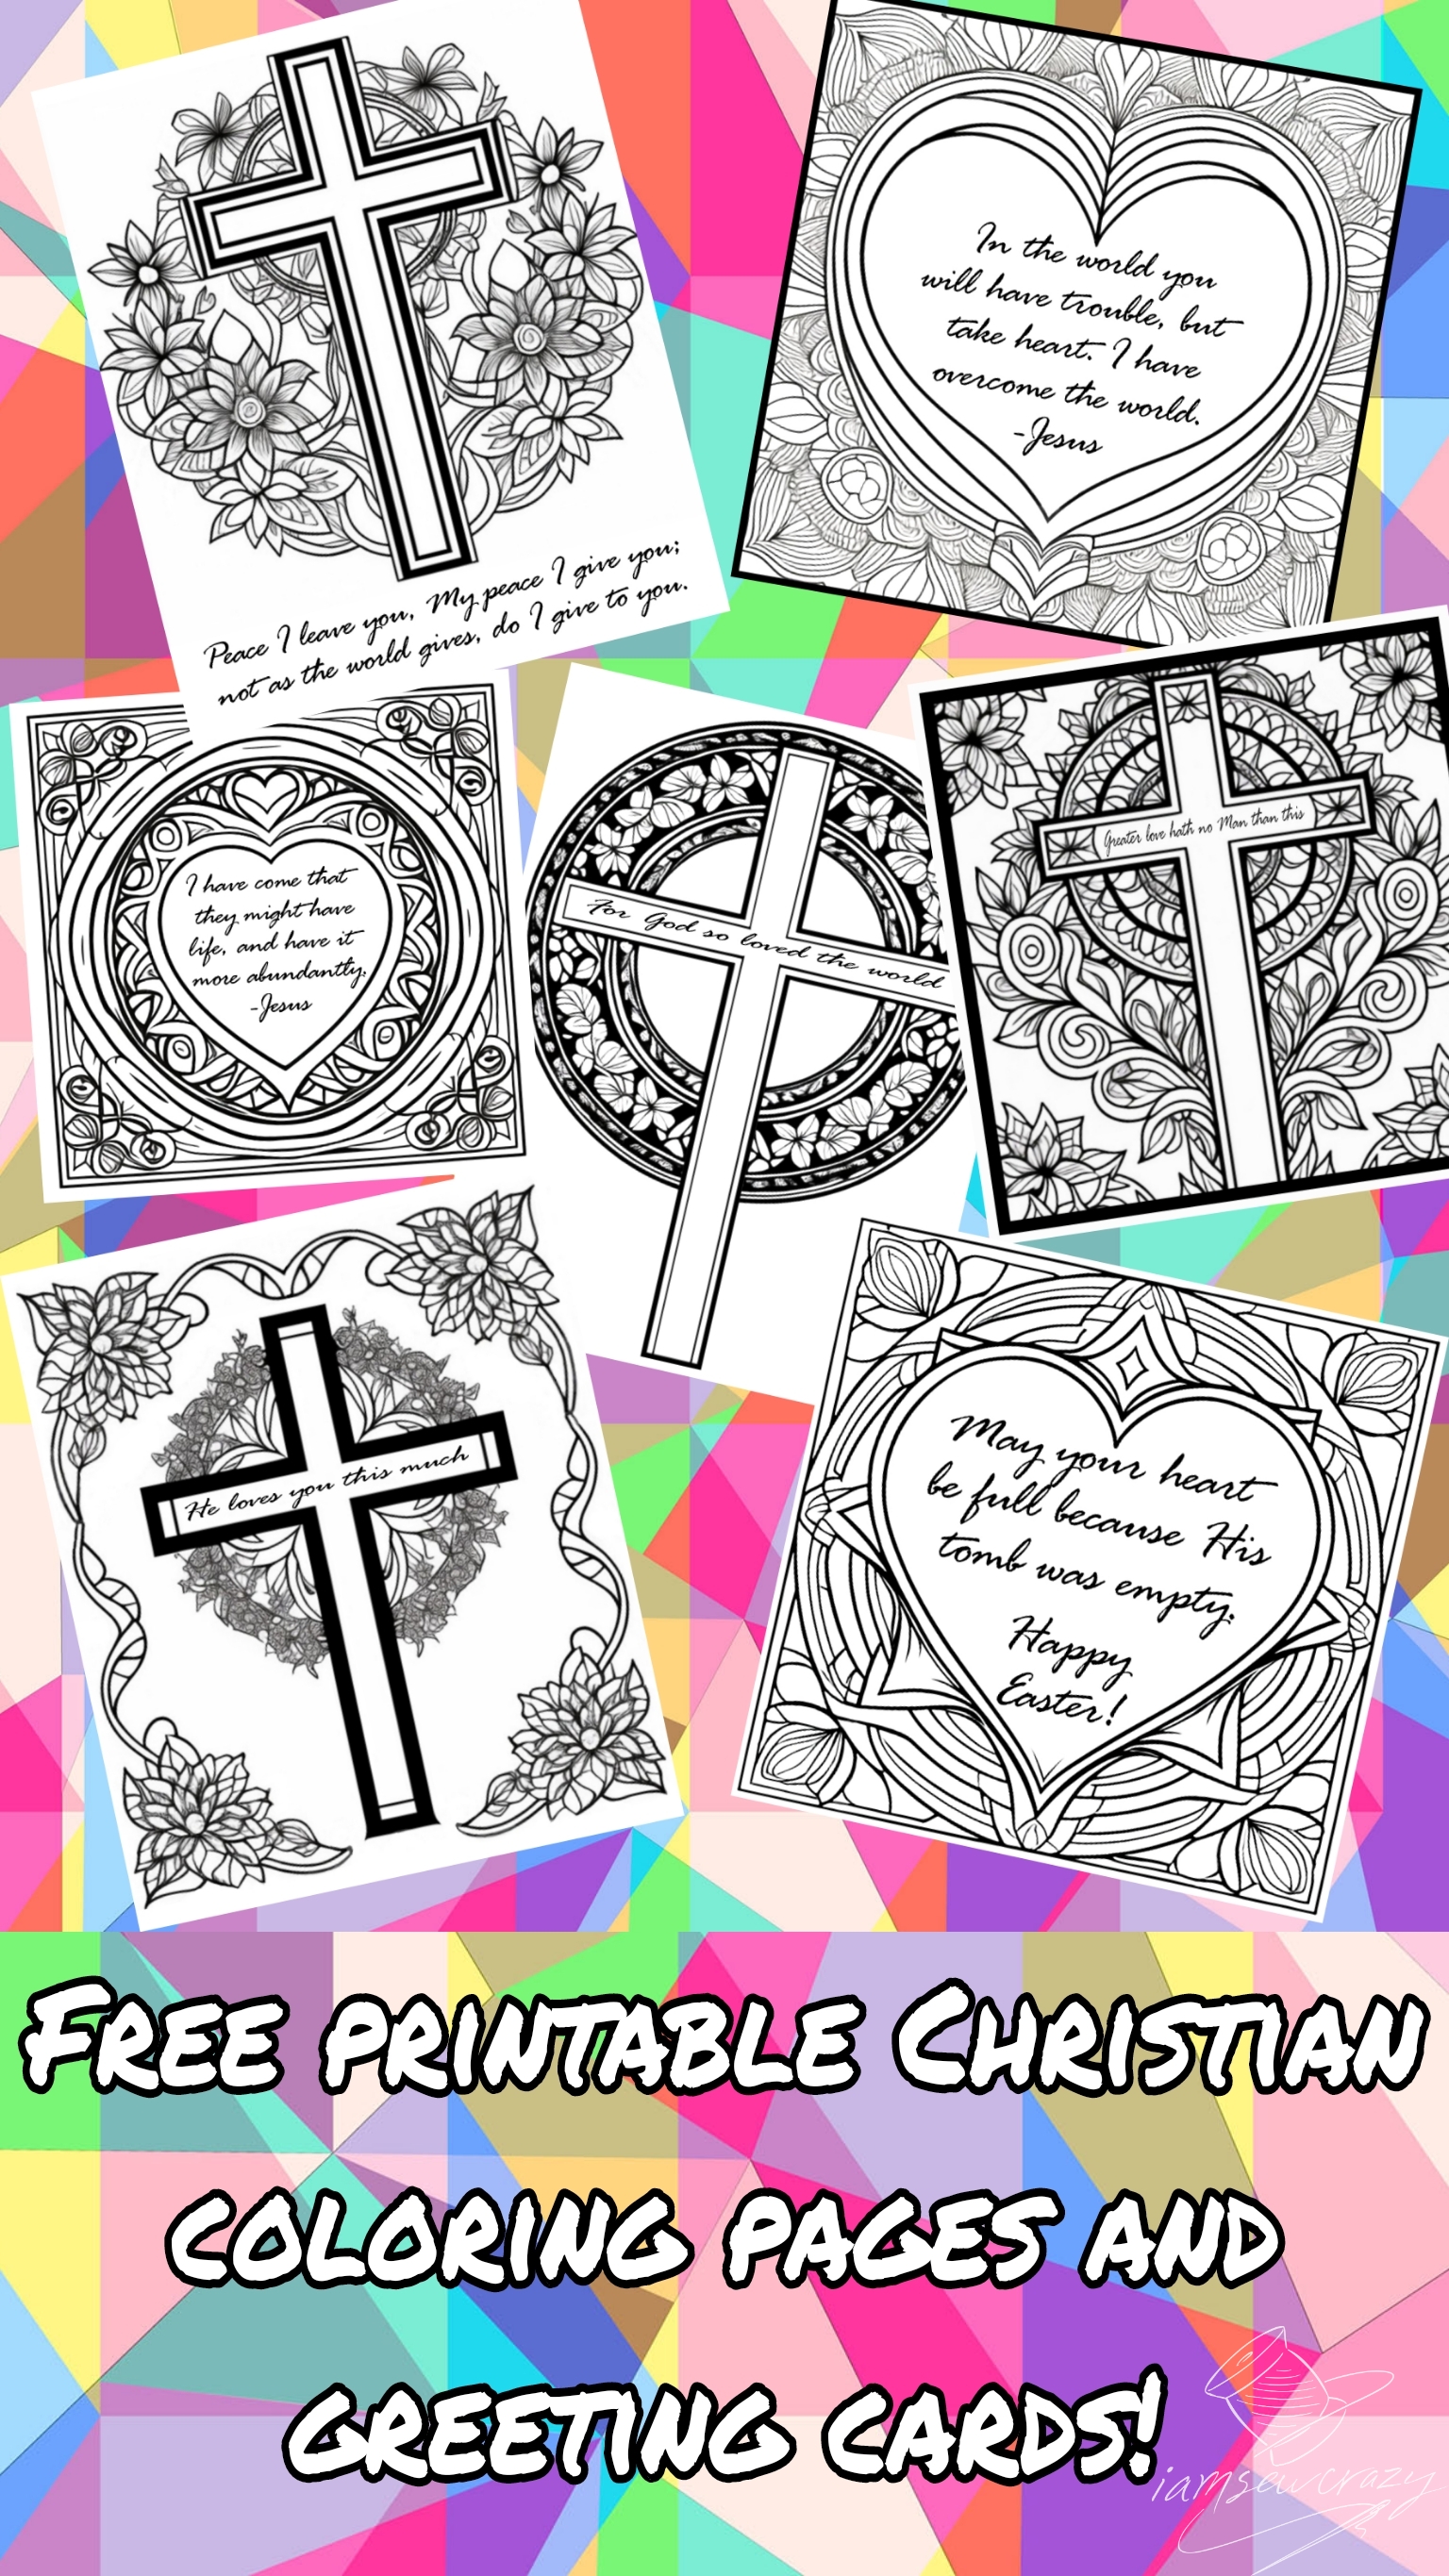 blank coloring pages on a colorful background with text overlay: free printable christian coloring pages and greeting cards